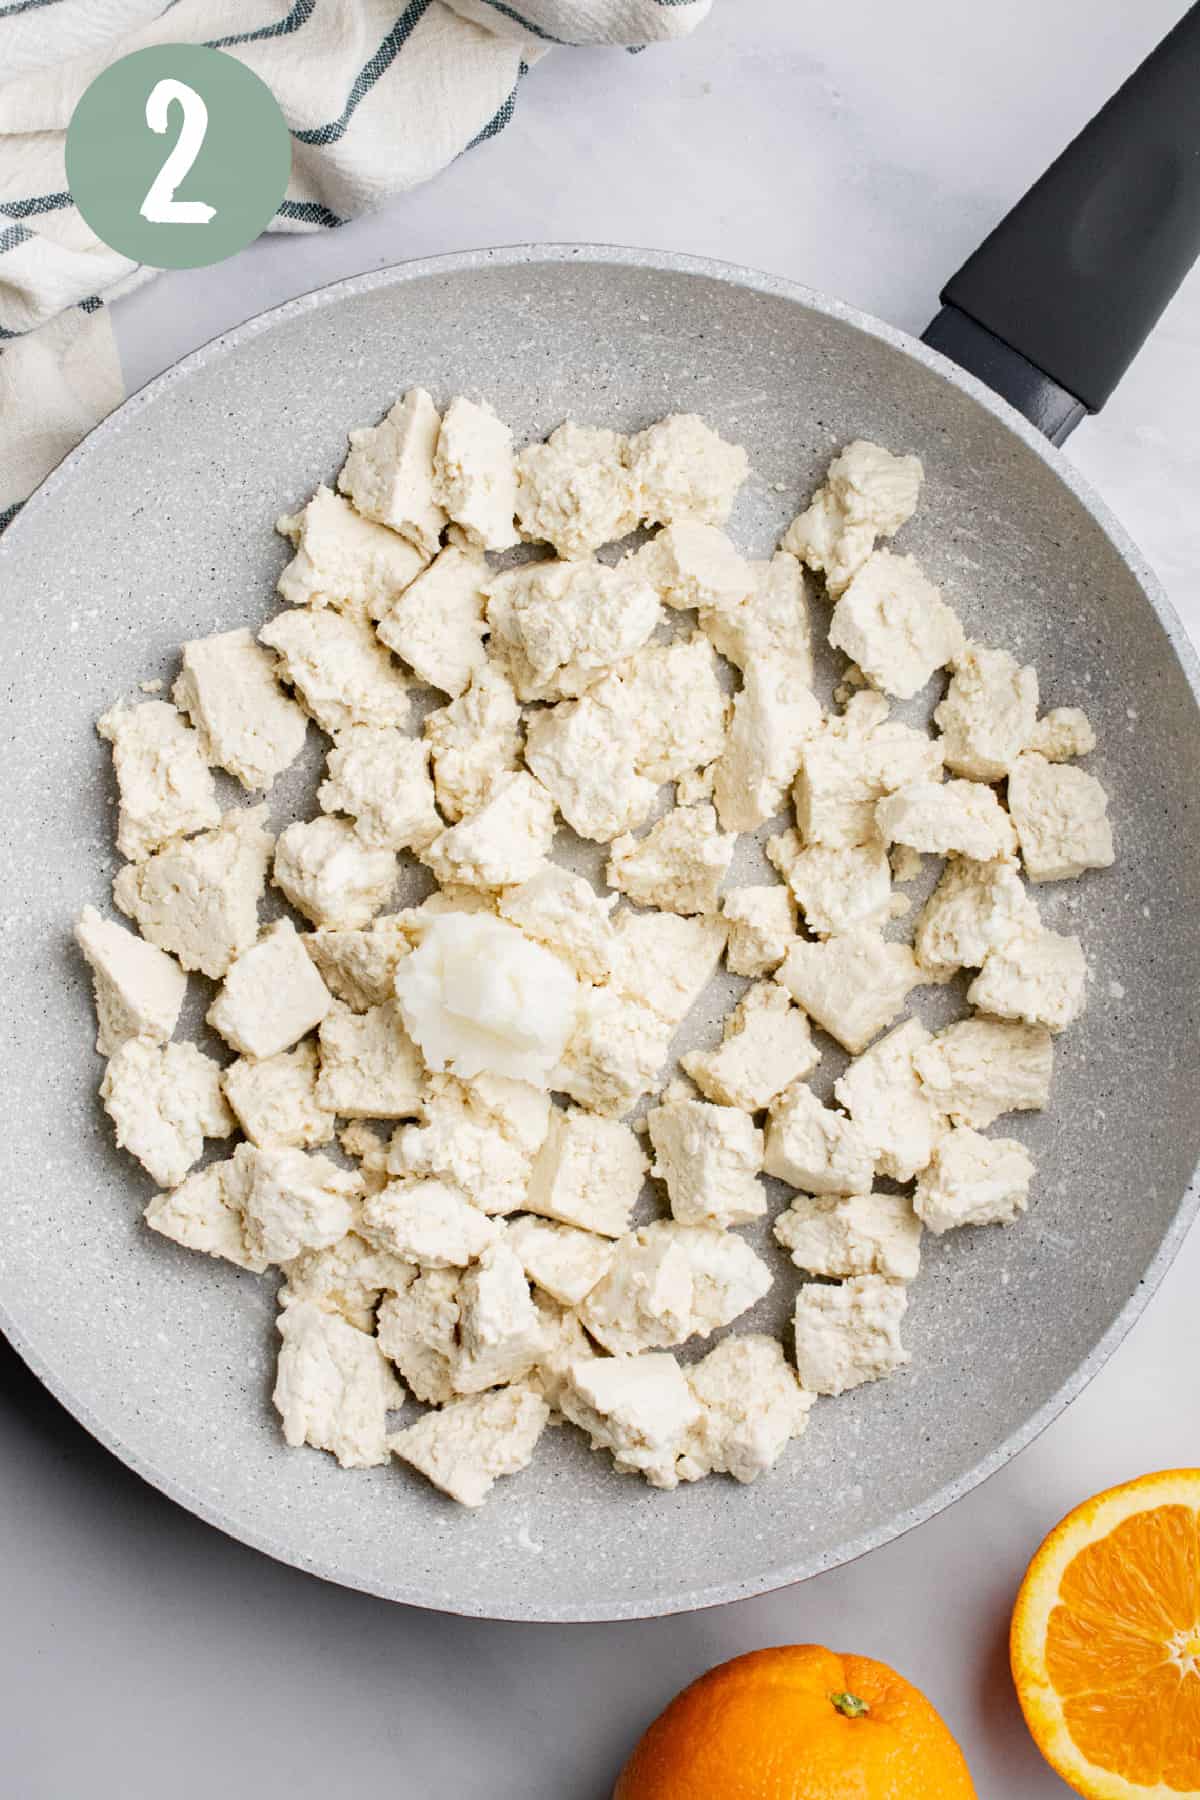 A frying pan with pieces of uncooked tofu and a dollop of coconut oil.